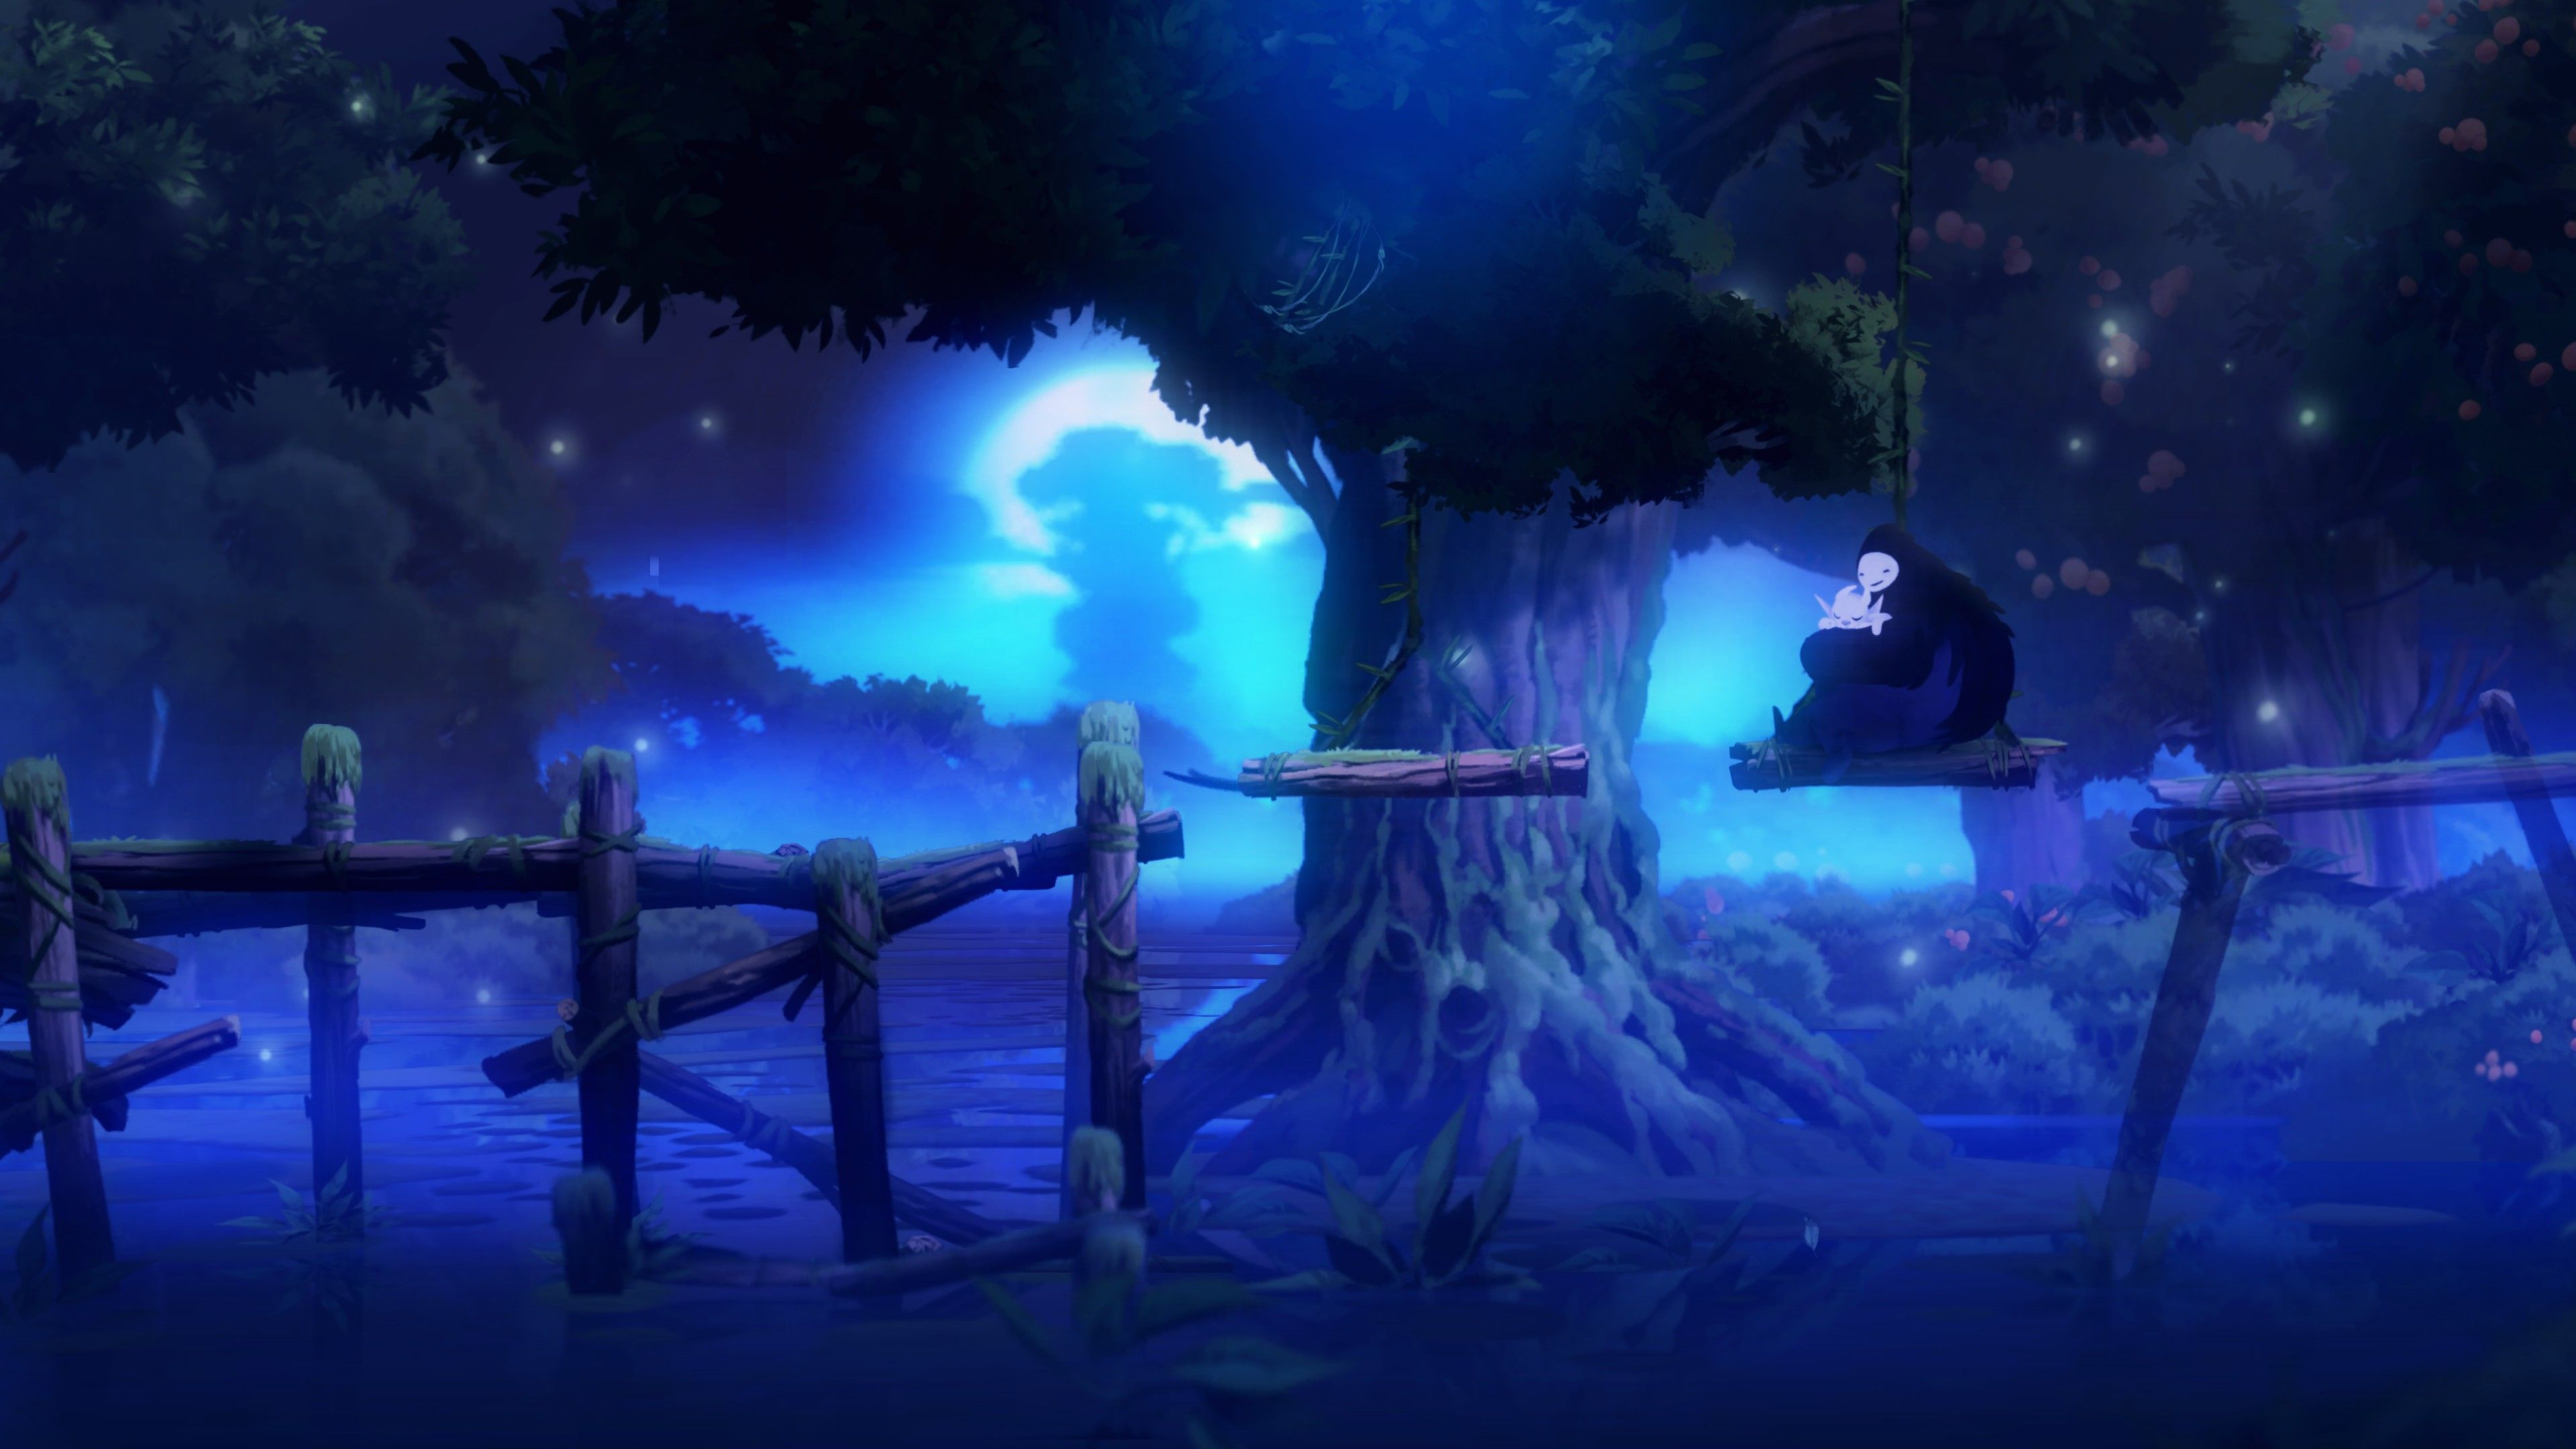 3840x2160 Ori and the Blind Forest 4K Wallpapers Top Free Ori and the Blind Forest 4K Backgrounds | Xbox one games, Xbox one, Xbox